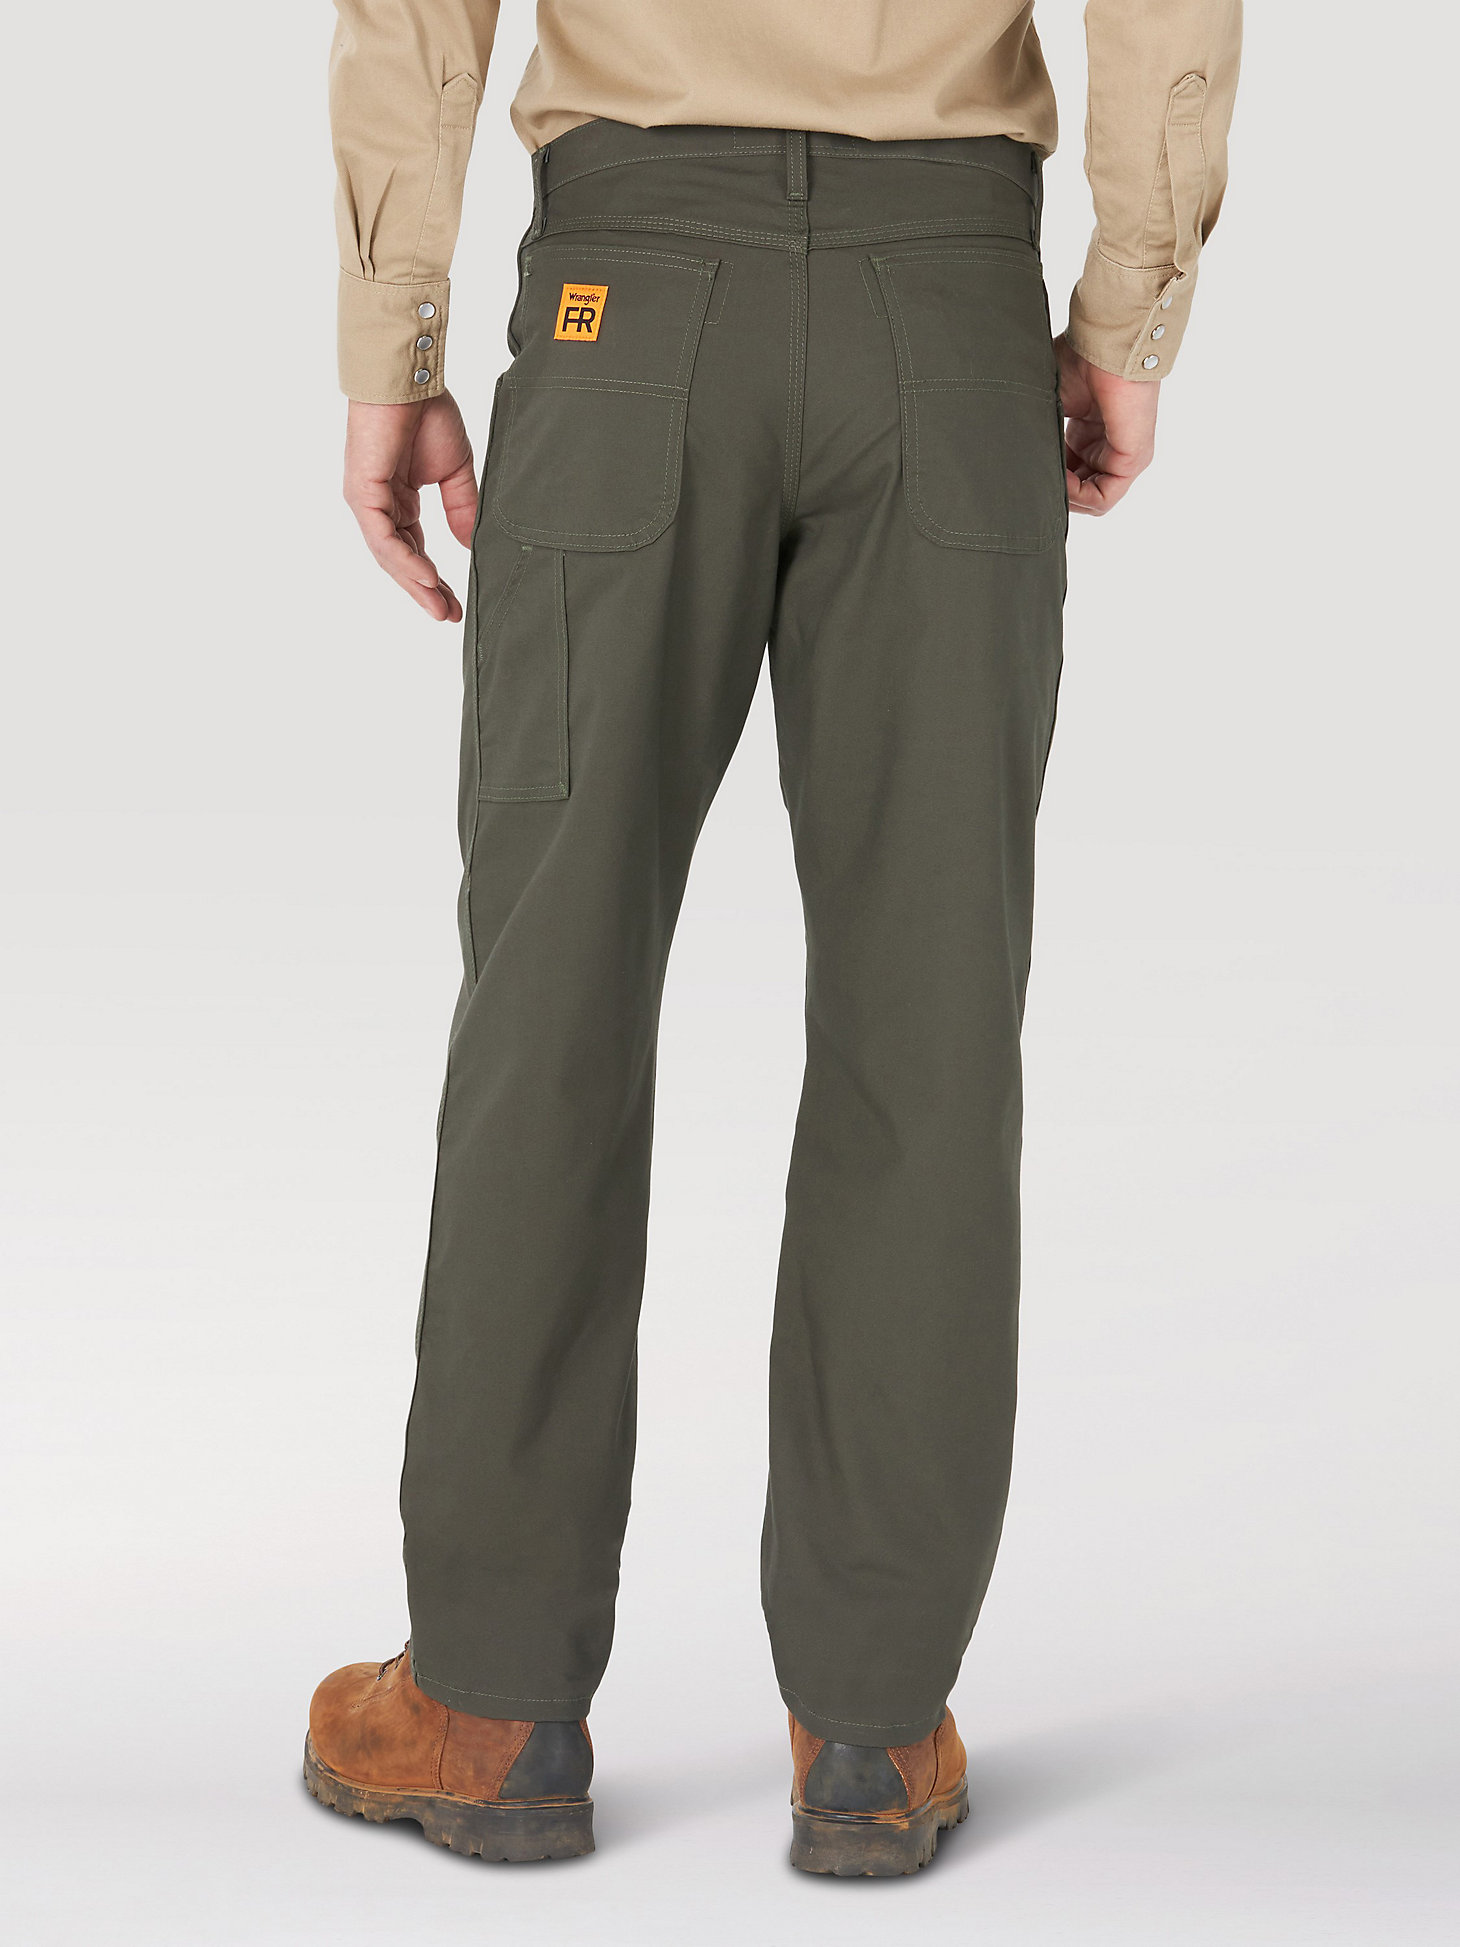 Wrangler® RIGGS Workwear® FR Flame Resistant Carpenter Pant in Loden alternative view 3